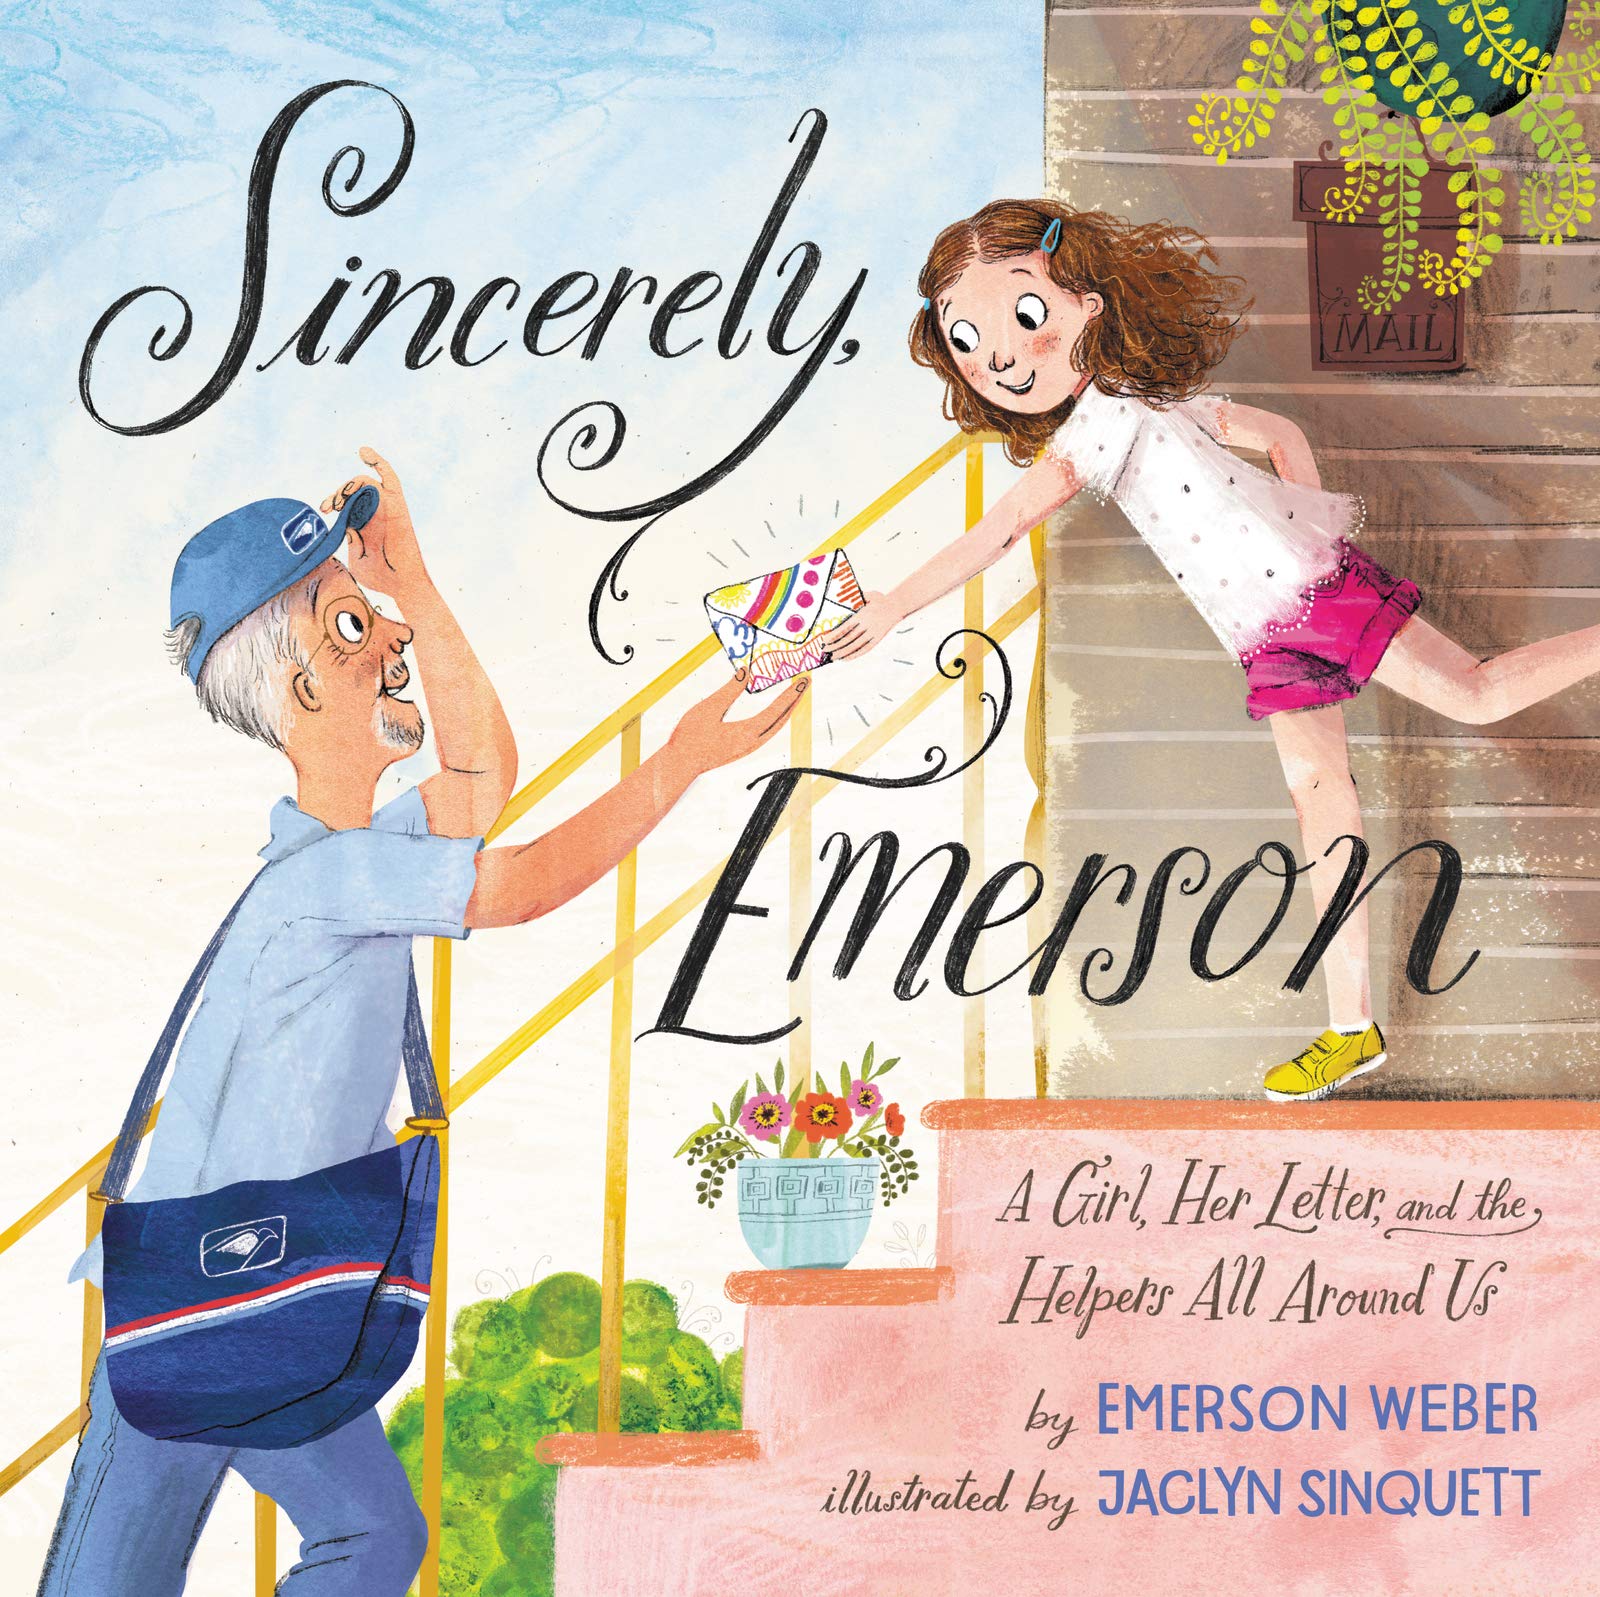 Sincerely, Emerson: A Girl, Her Letter, and the Helpers All Around Us by Emerson Weber